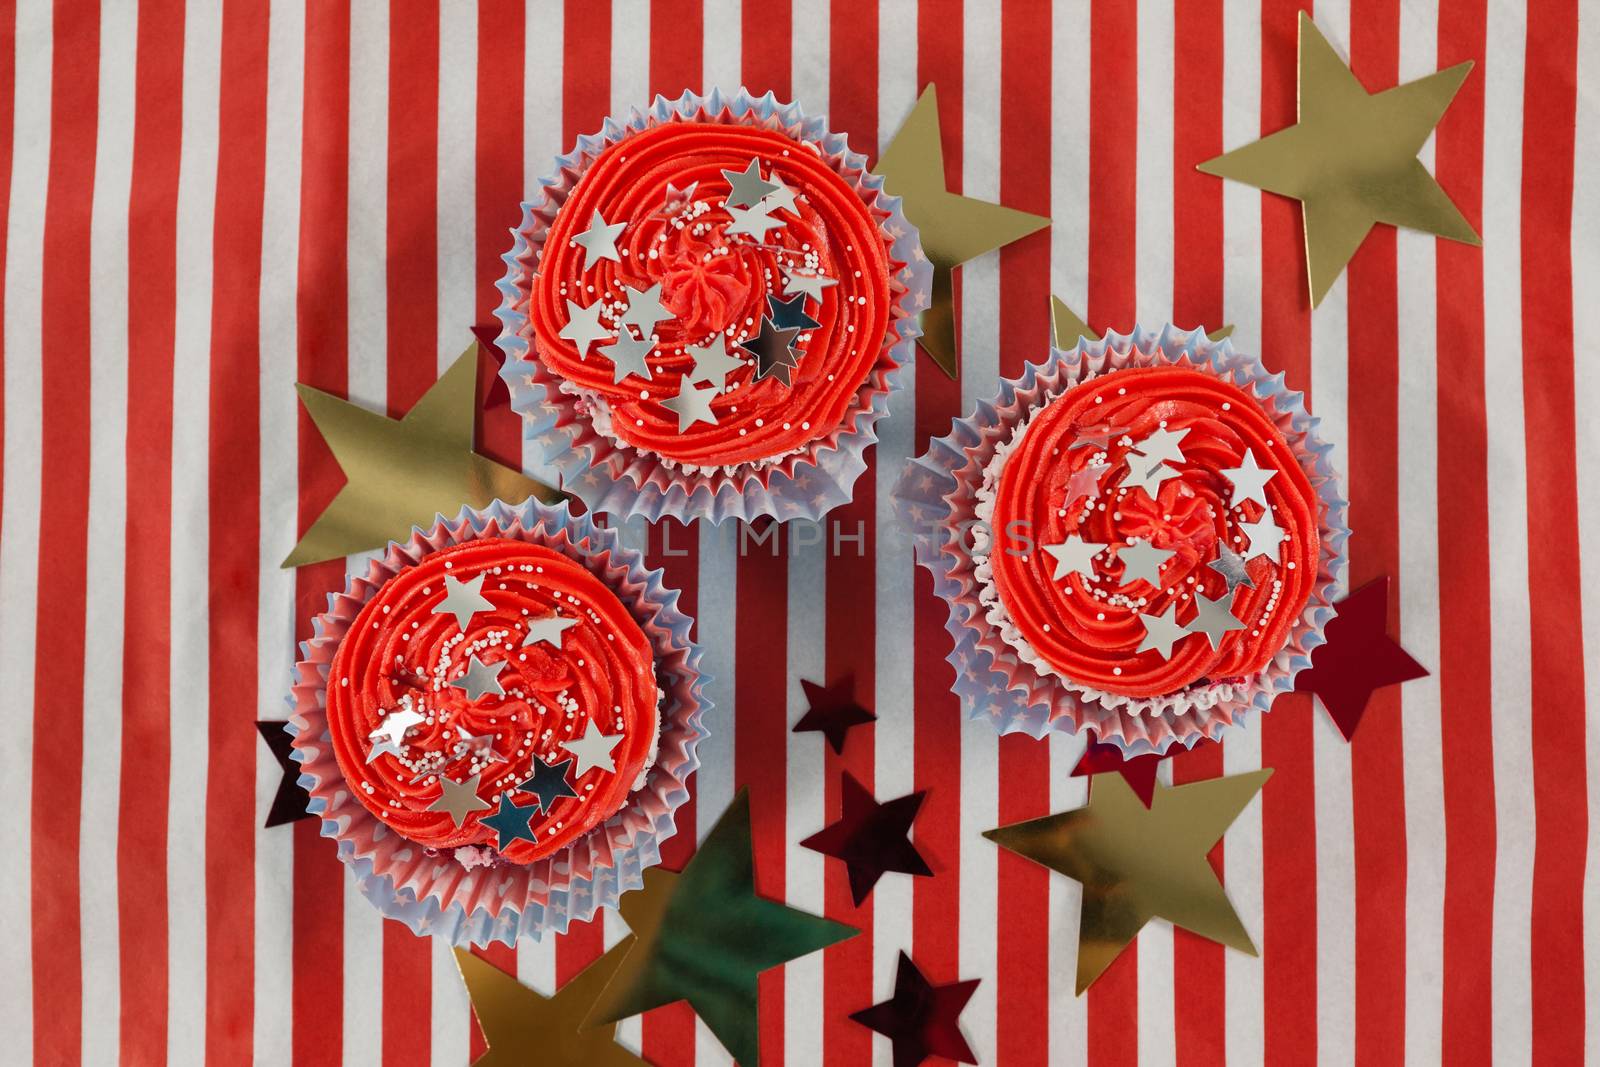 Decorated cupcakes with 4th july theme by Wavebreakmedia